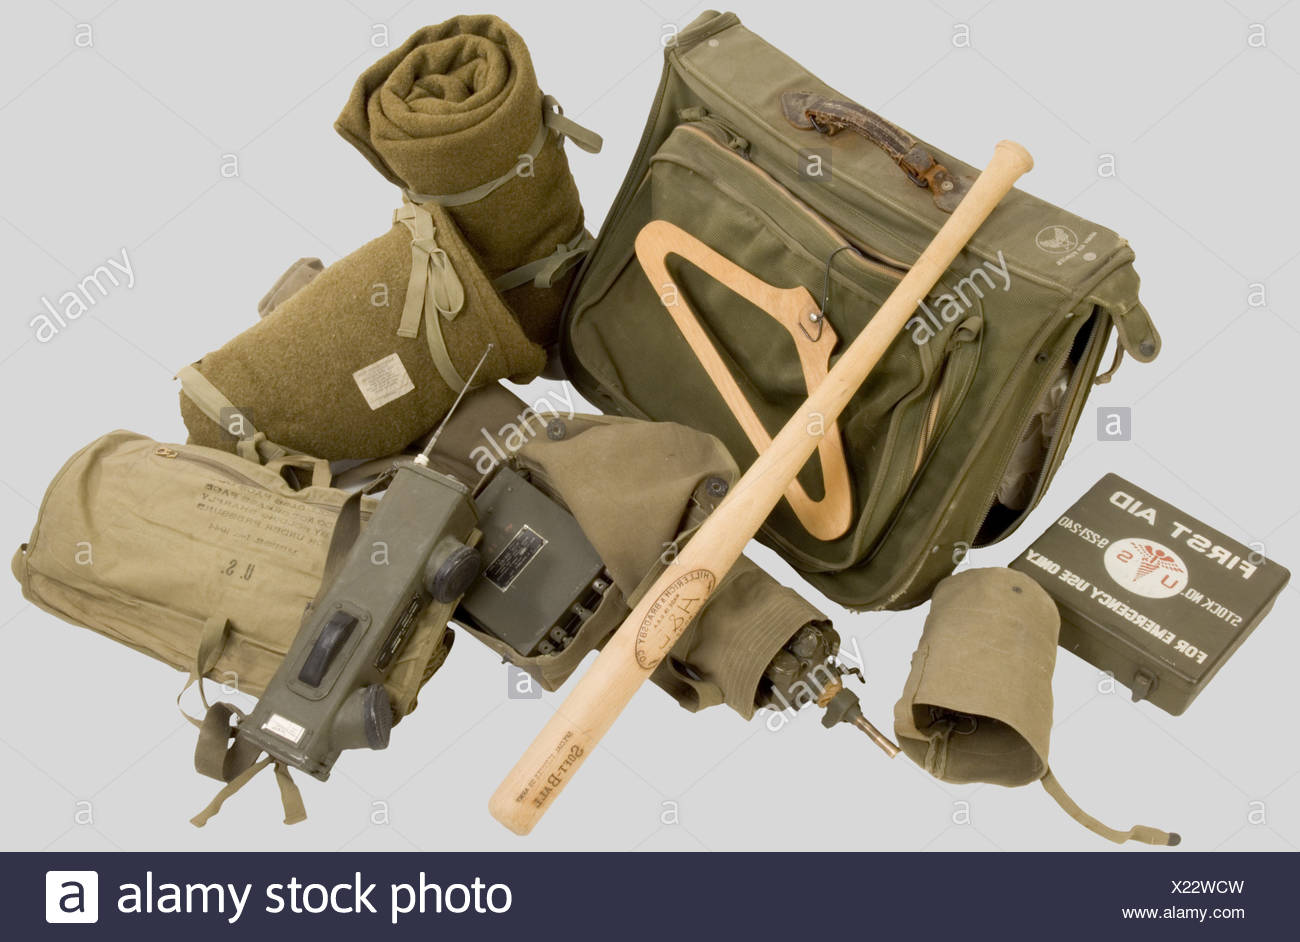 Signal Corps Radio High Resolution Stock Photography and Images - Alamy